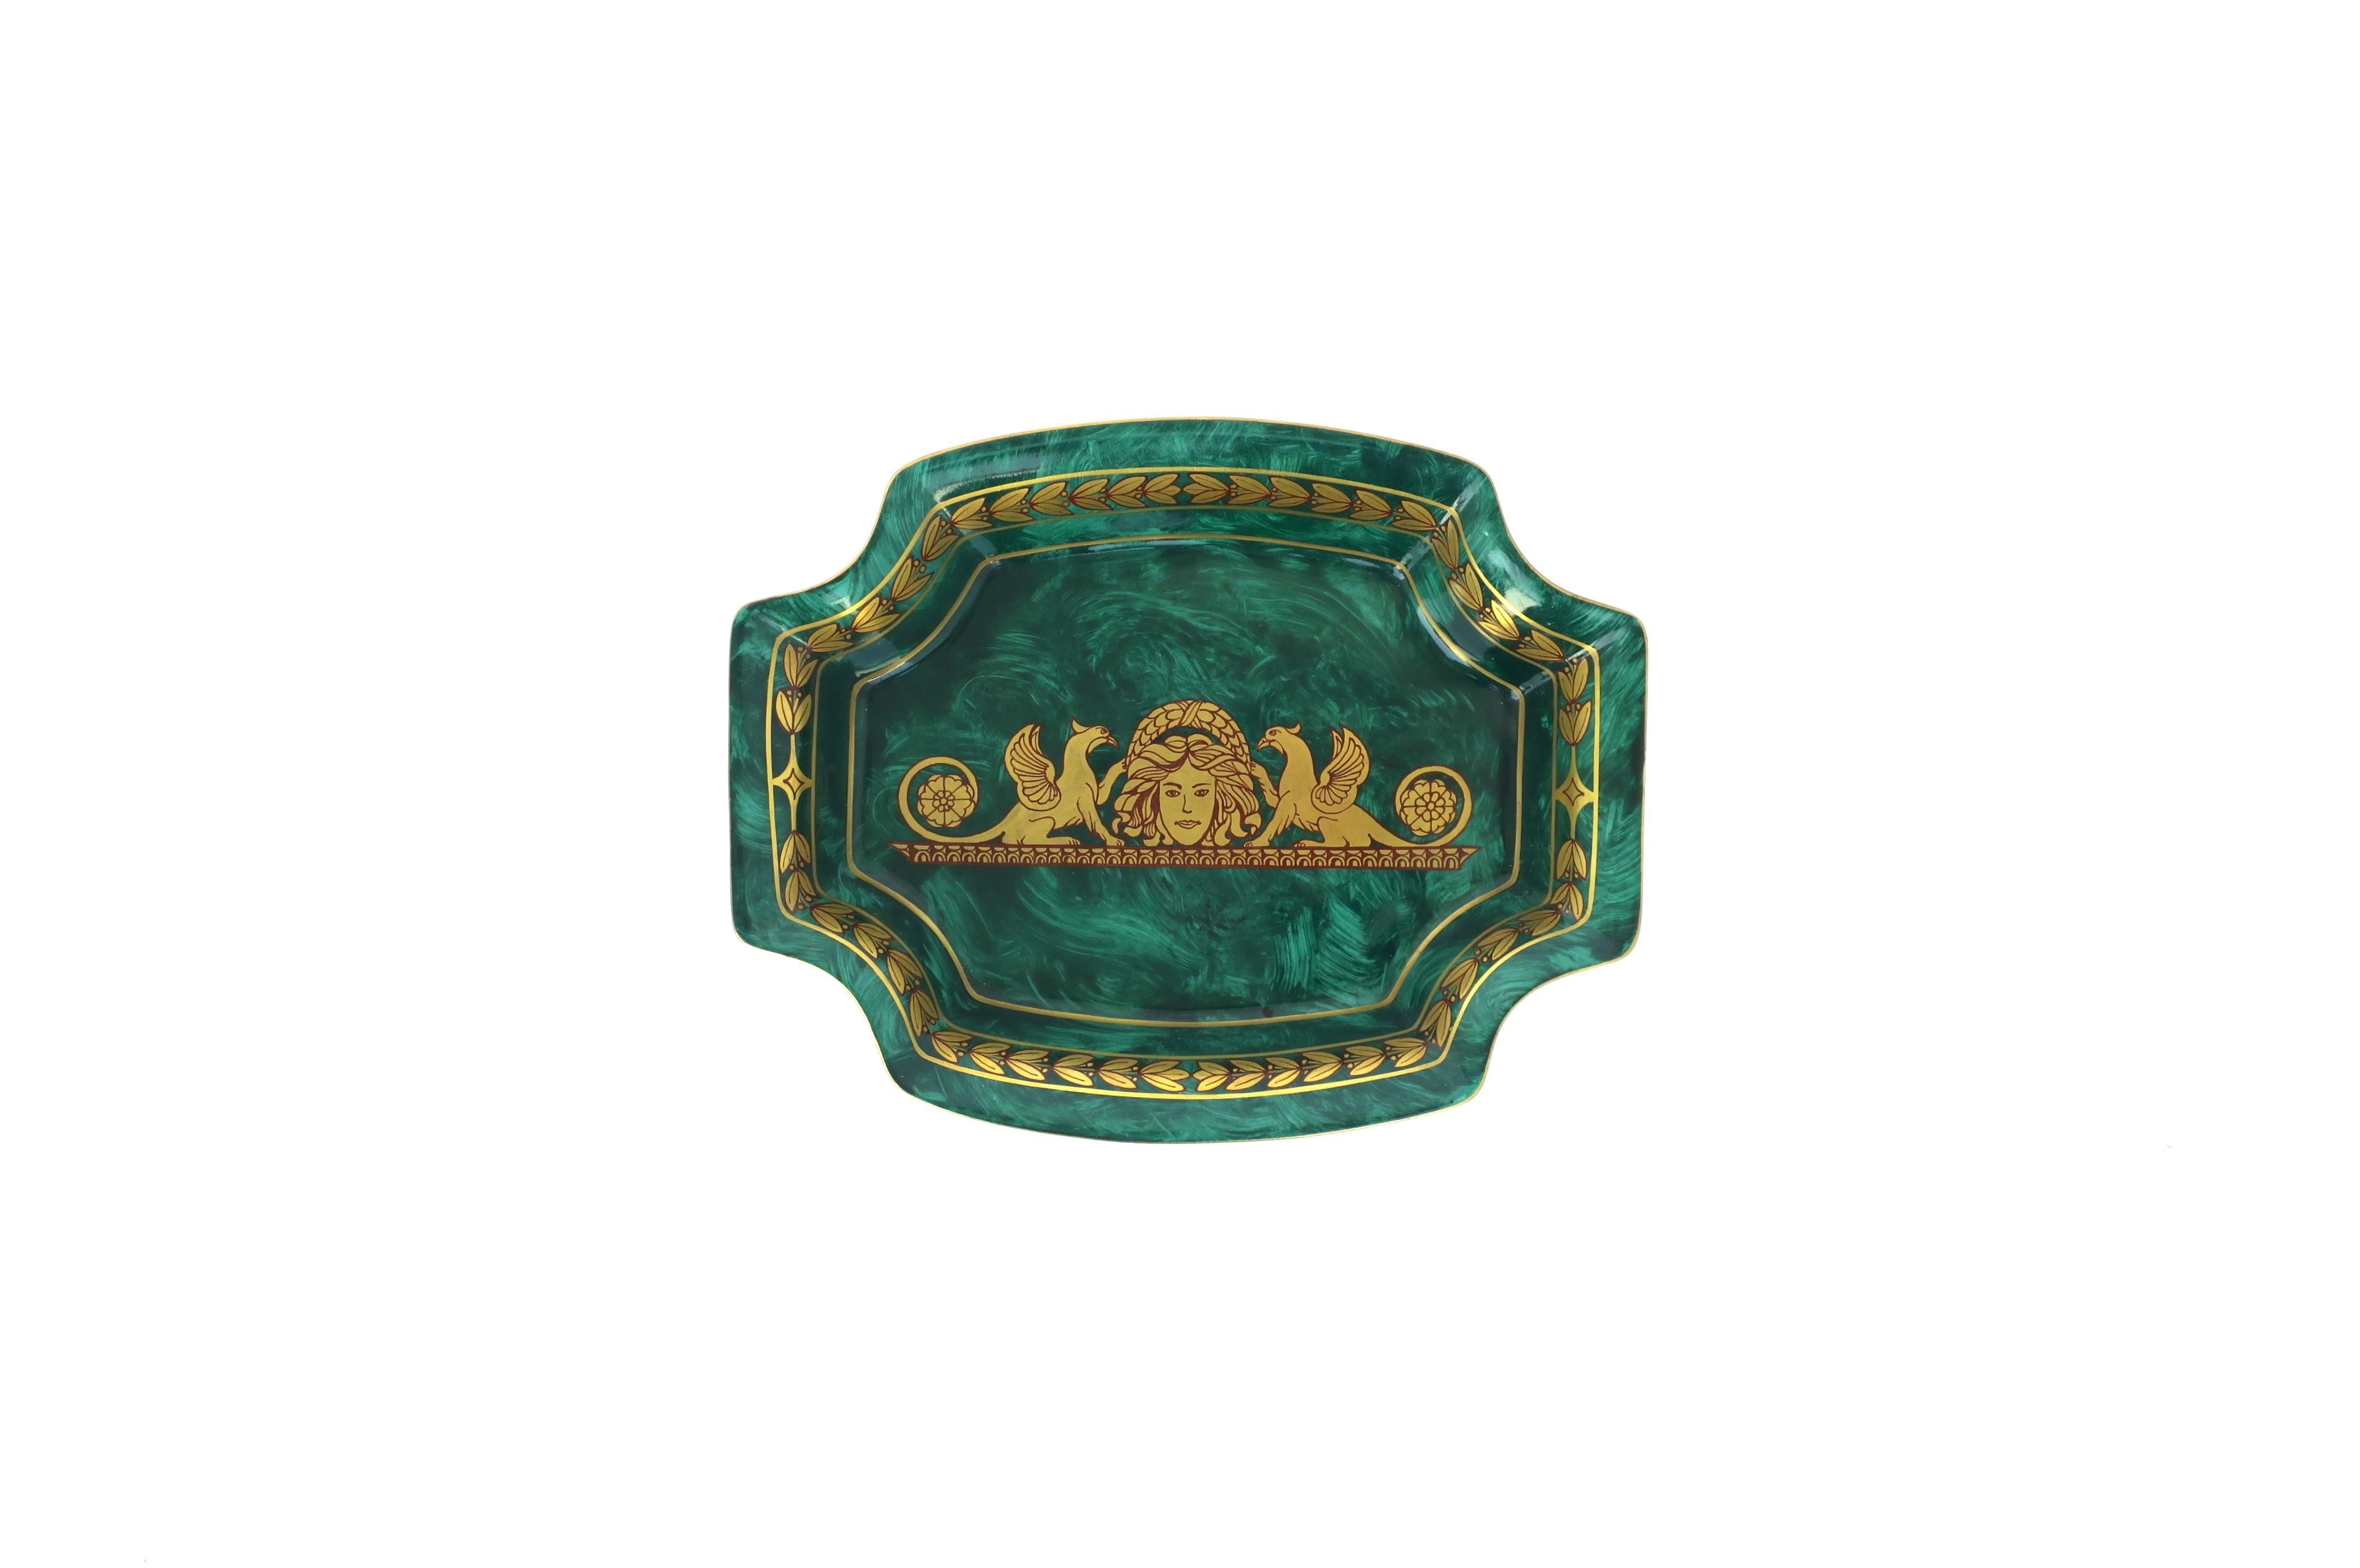 A beautiful and well-made hand painted porcelain jewelry dish, in the Empire style, circa mid to late-20th century, Hungary. This octagonal dish vide-poche catchall has a beautiful hand-painted green malachite design accompanied by gold gilt